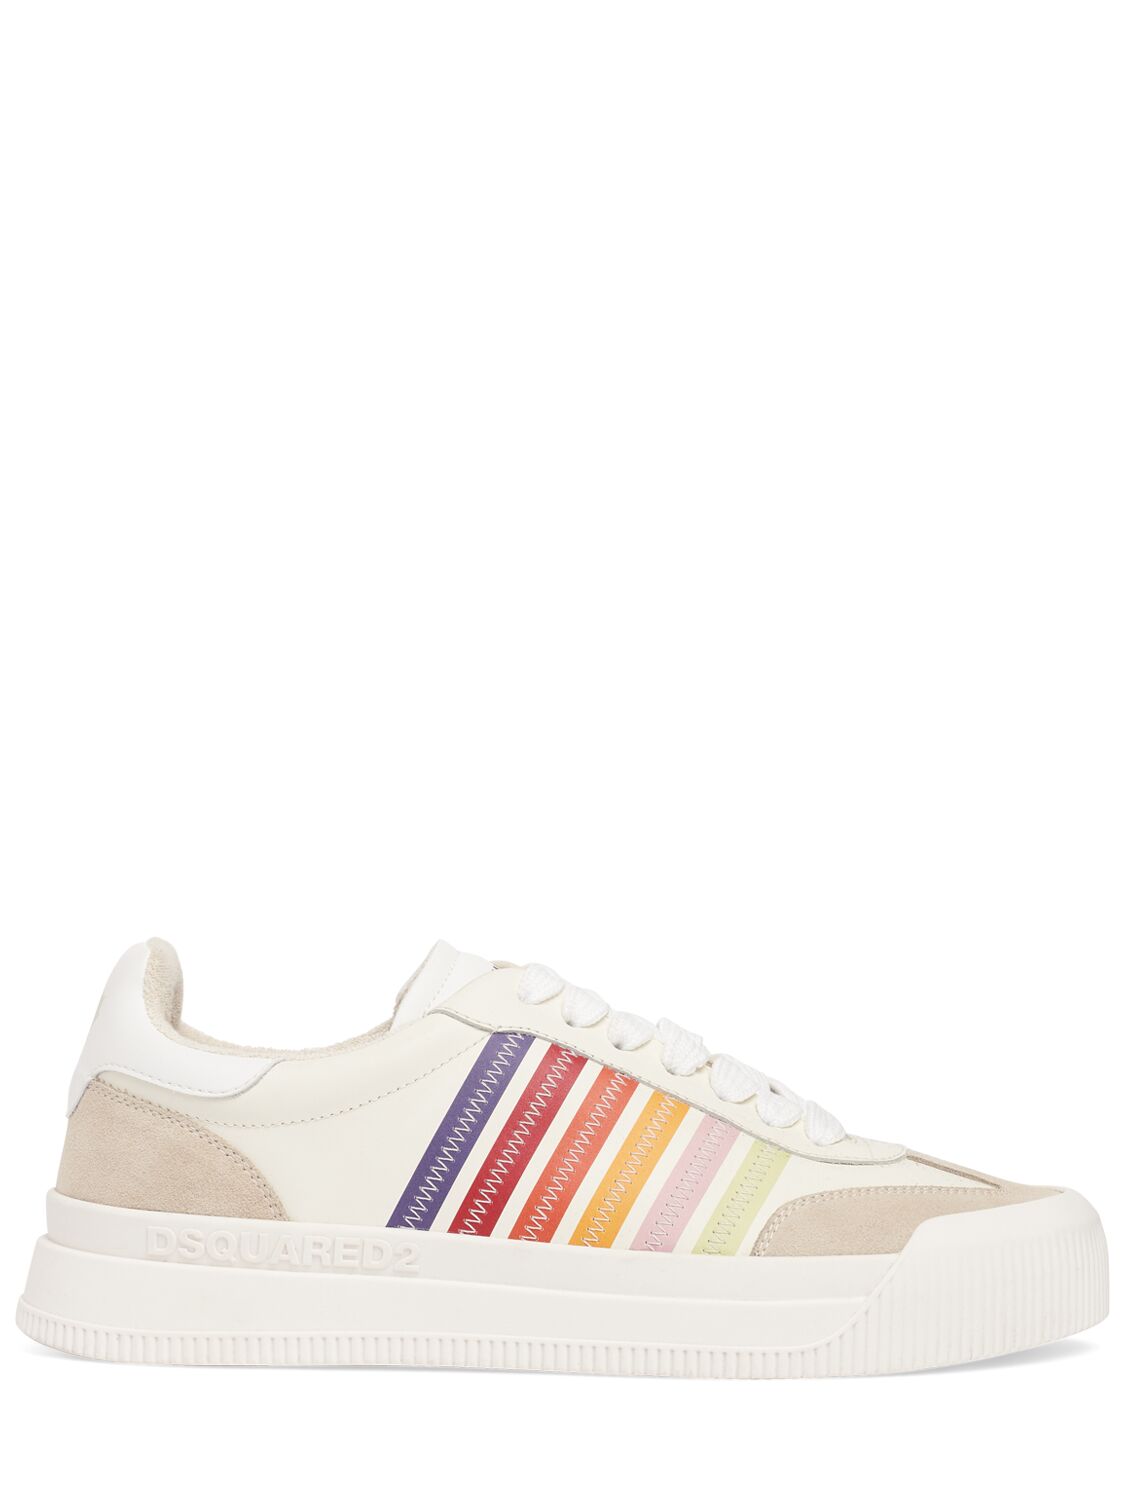 Dsquared2 Logo Leather Sneakers In White